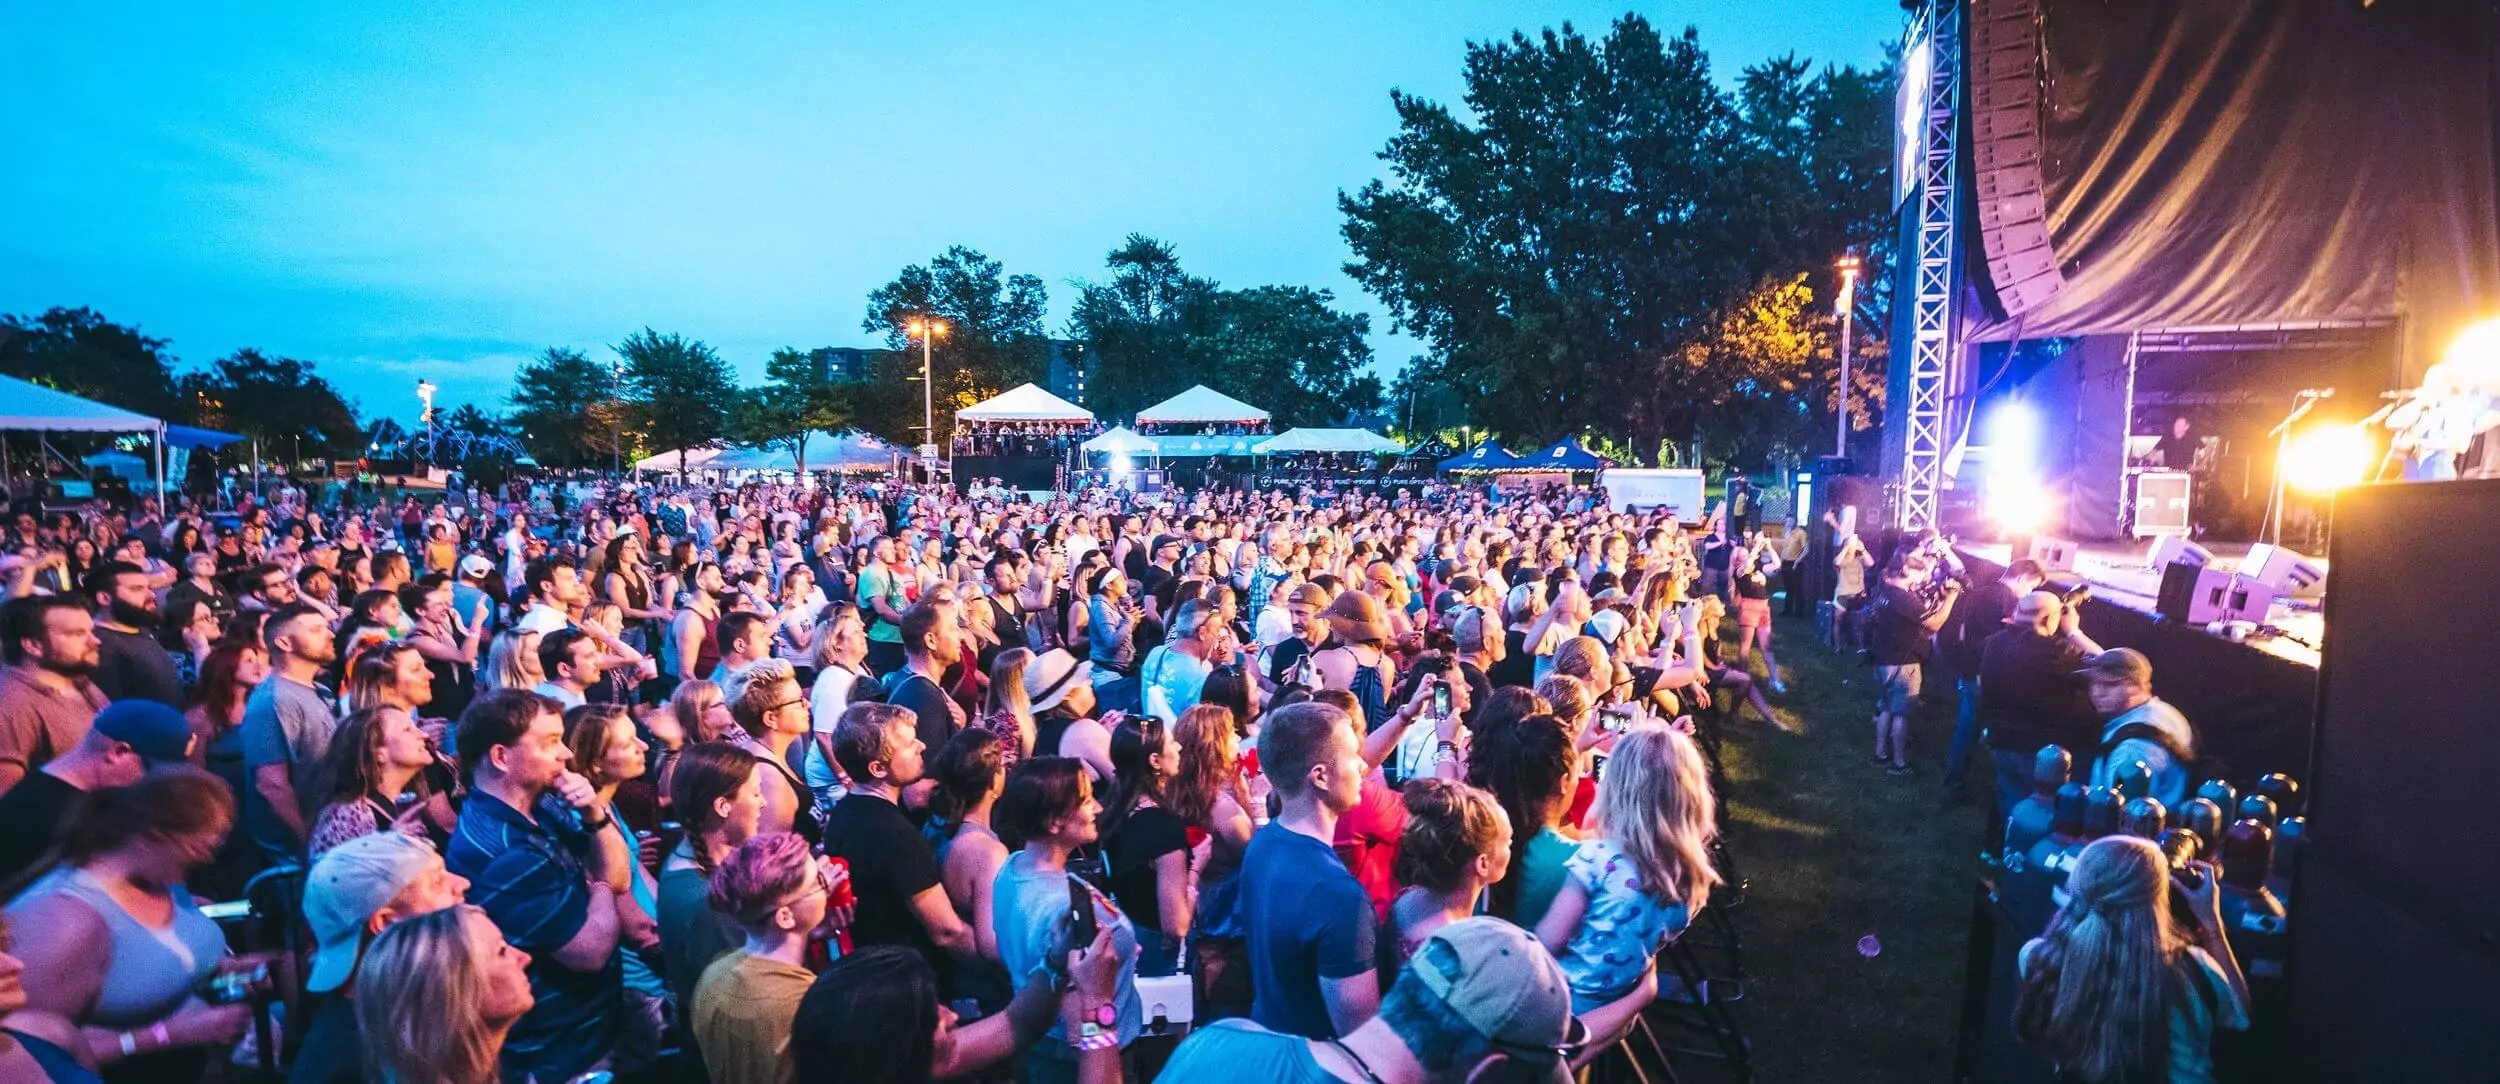 Crowd gathers for the Common Ground music fest in Lansing at night.